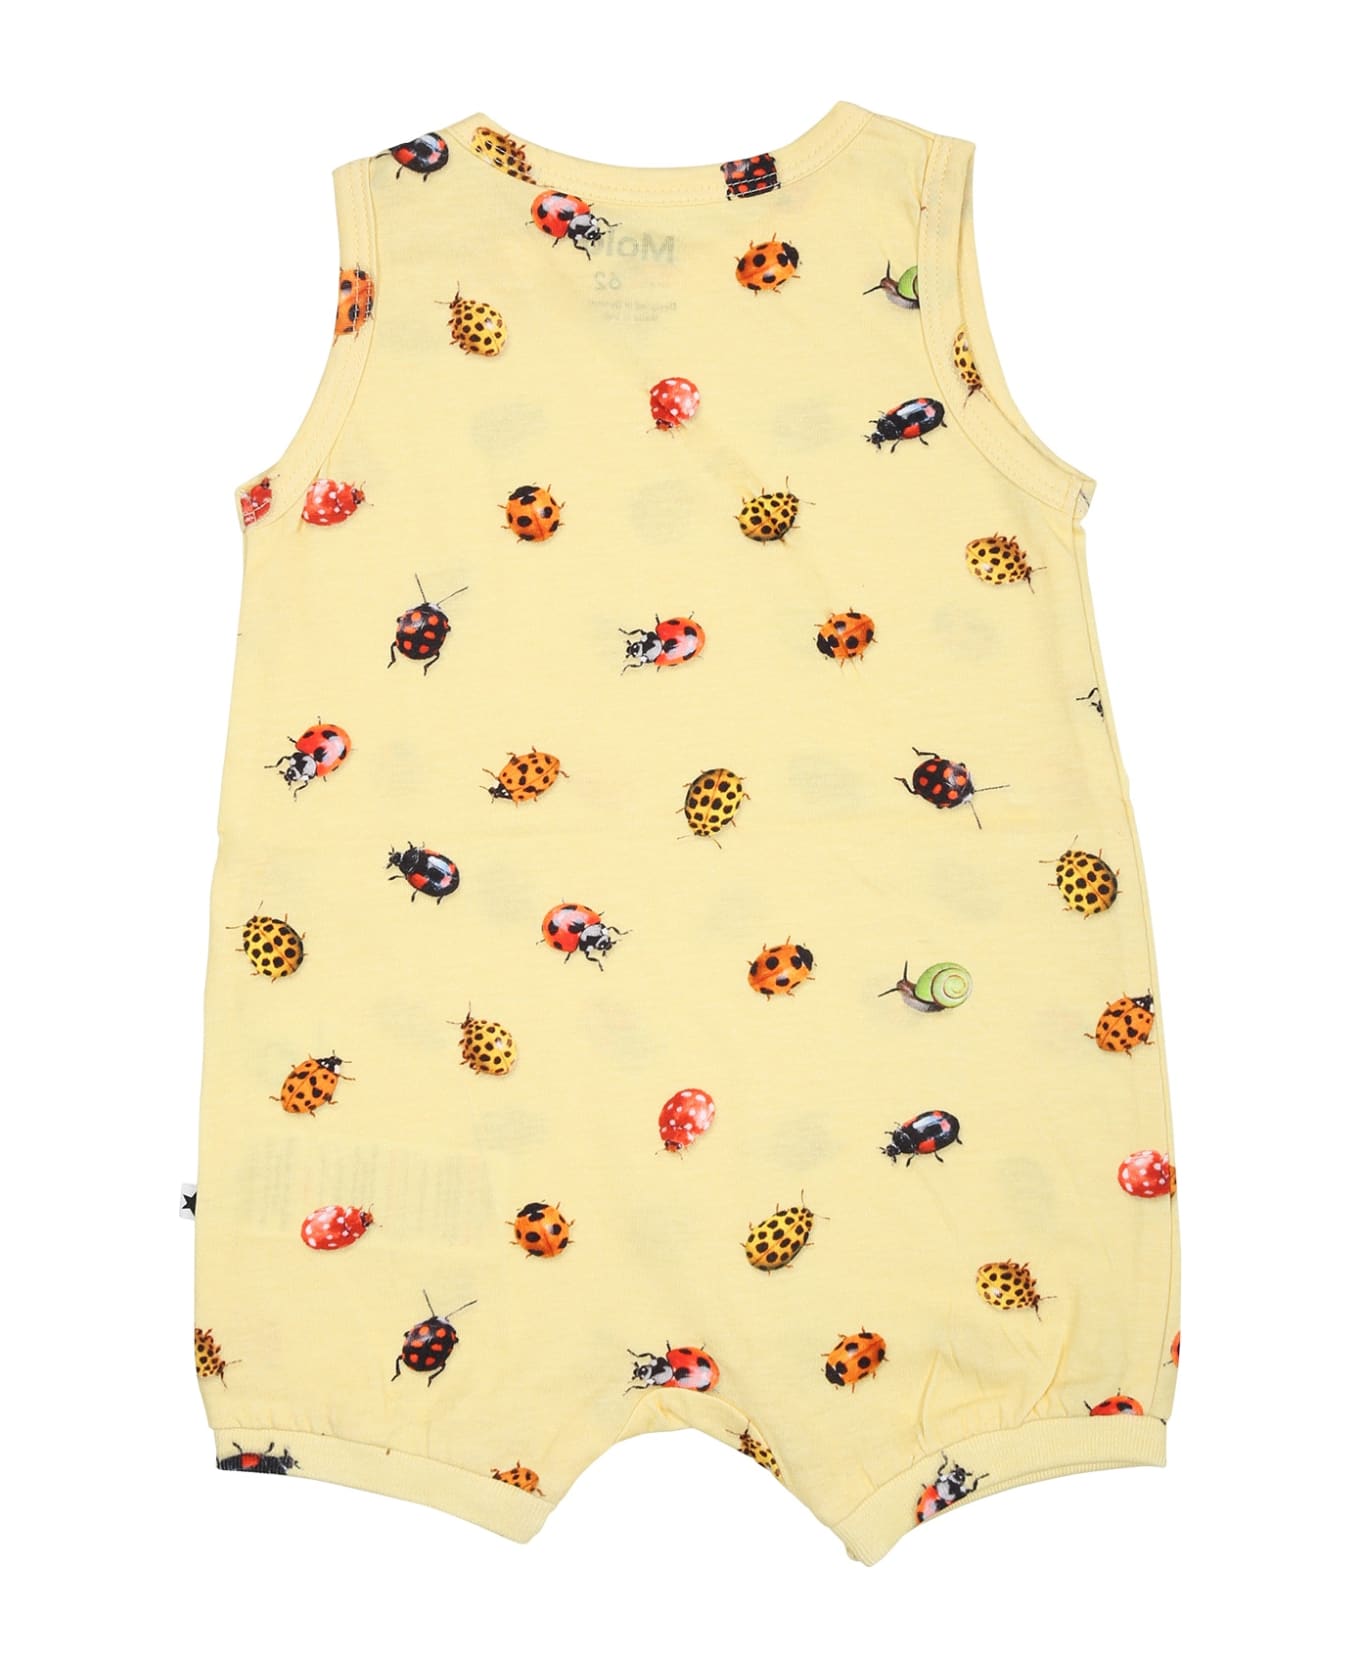 Molo Yellow Romper For Baby Kids With Ladybugs - Yellow